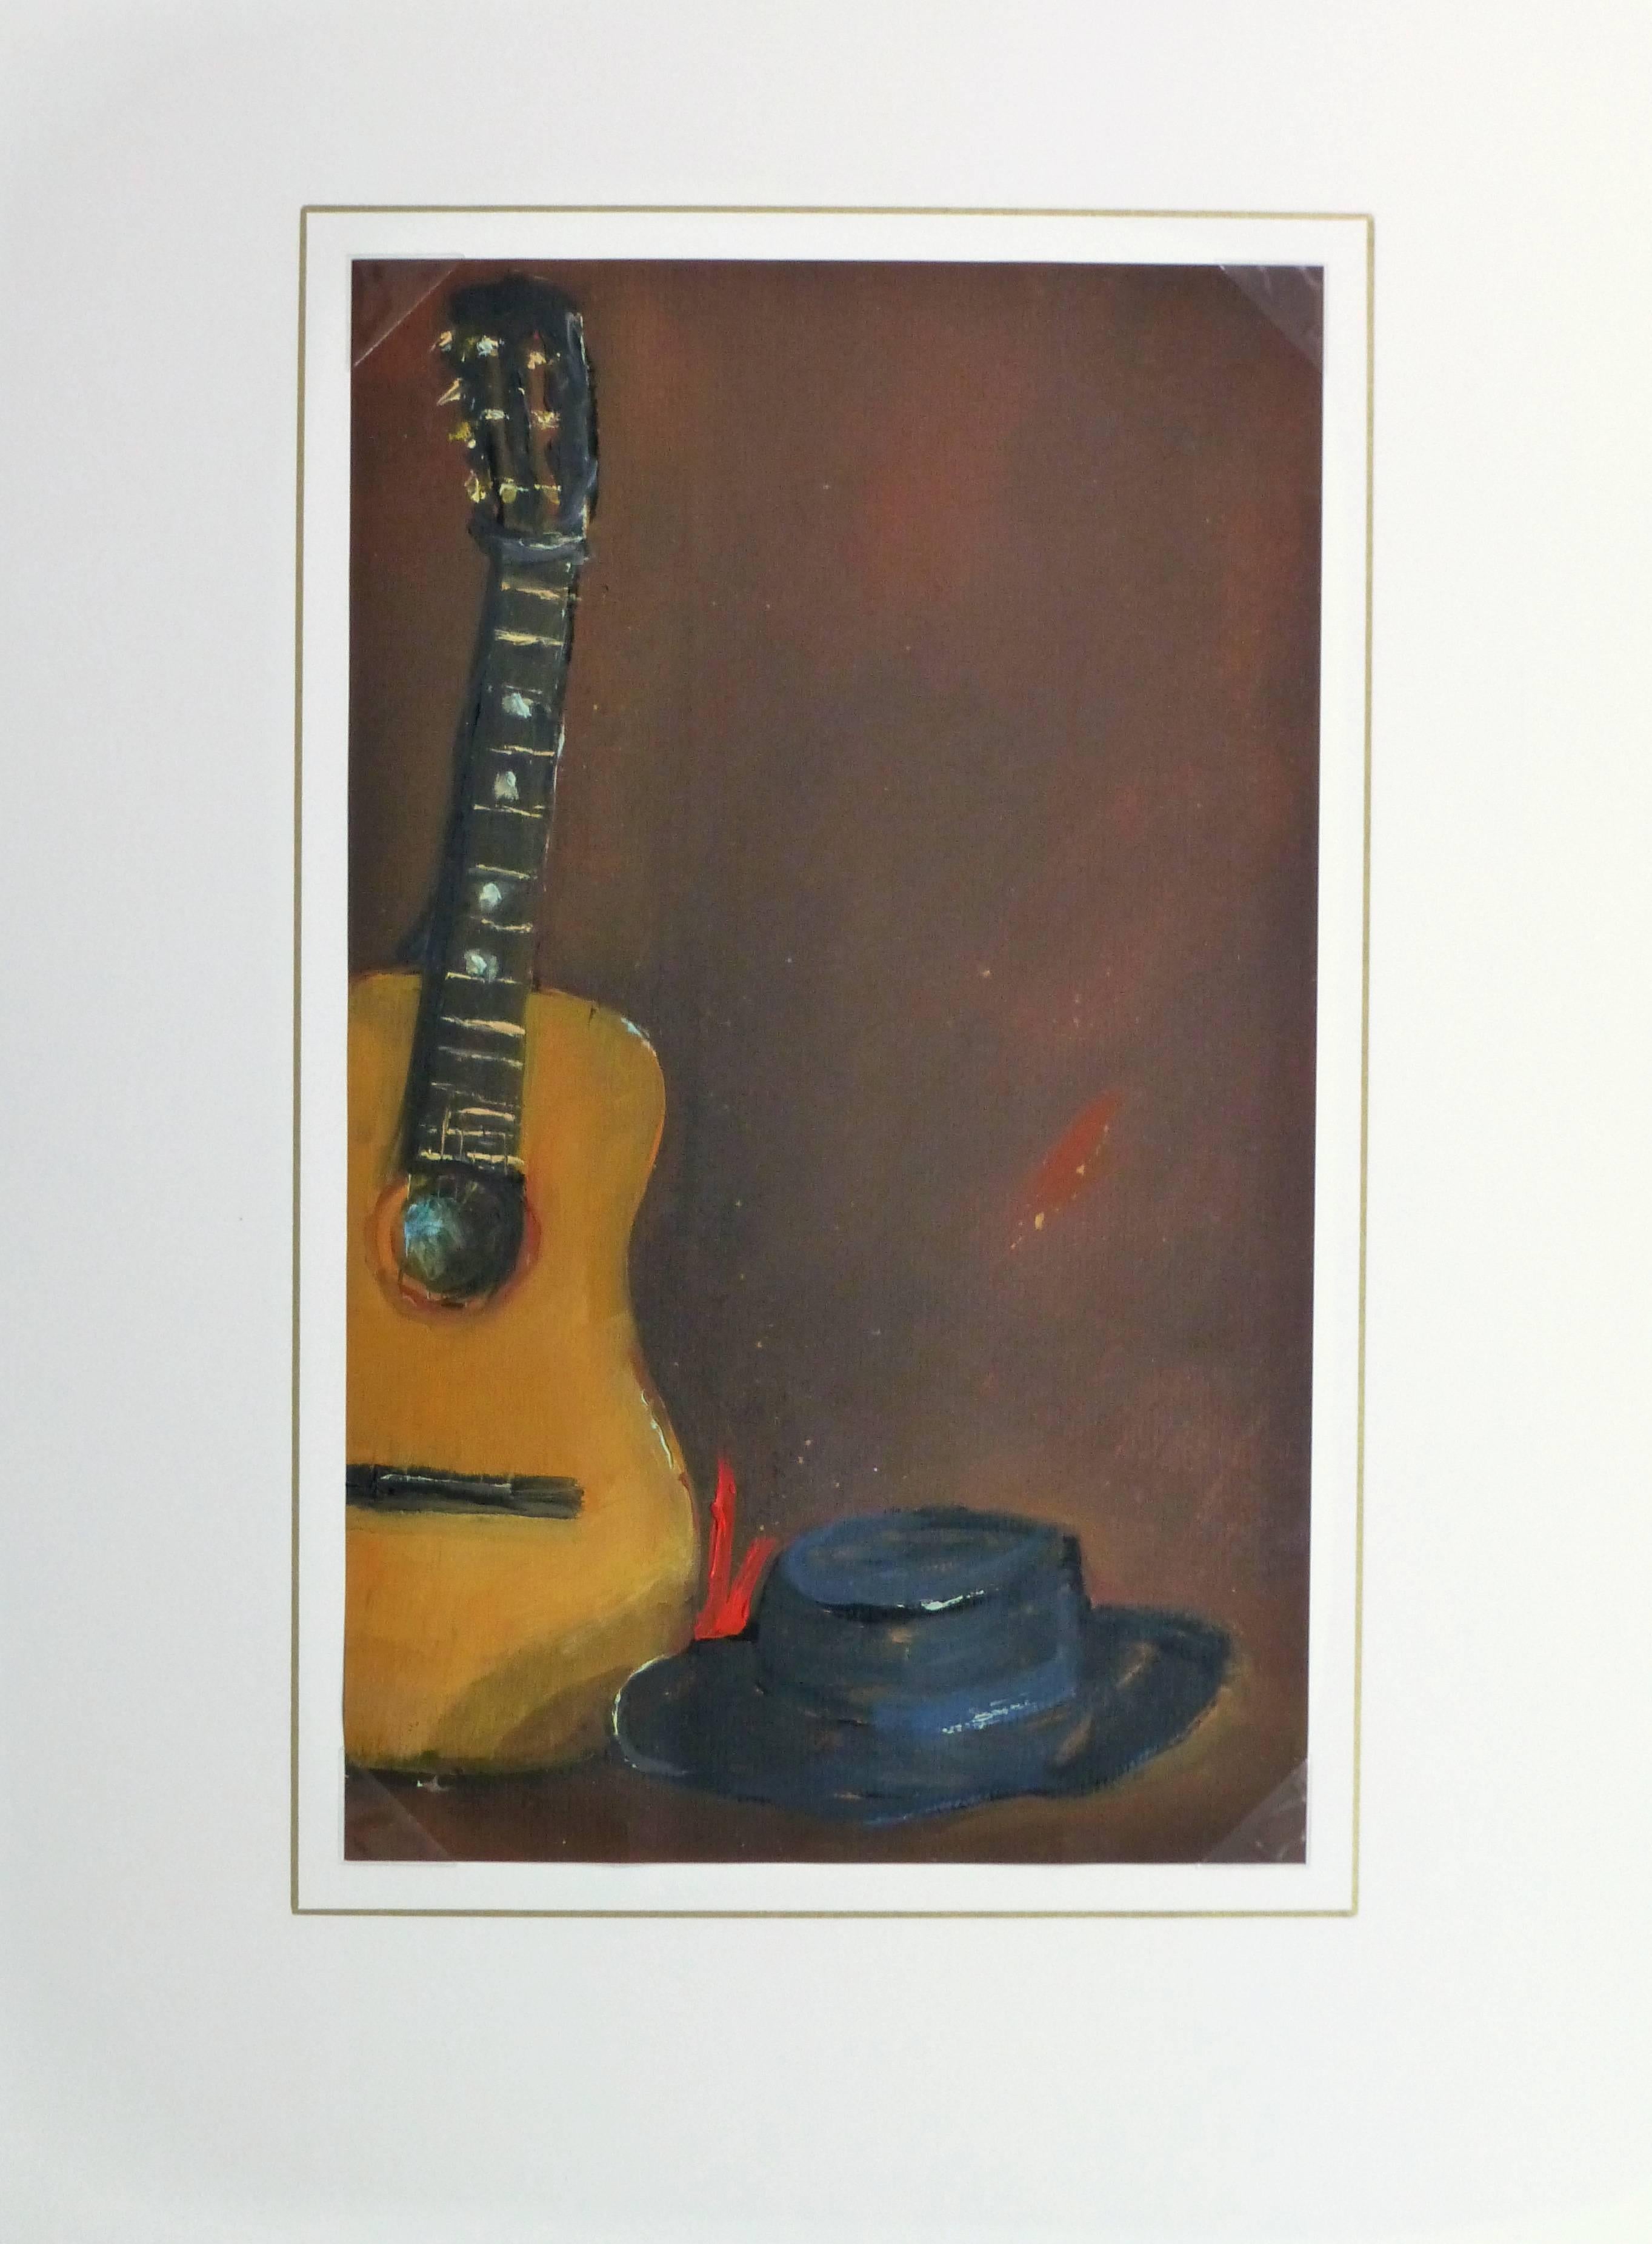 Compelling vintage oil on paper still life painting of a black hat alongside an acoustic guitar against a velvety brown background by French artist Raymond Bailly, circa 1960.

Original one-of-a-kind artwork on paper displayed on a white mat with